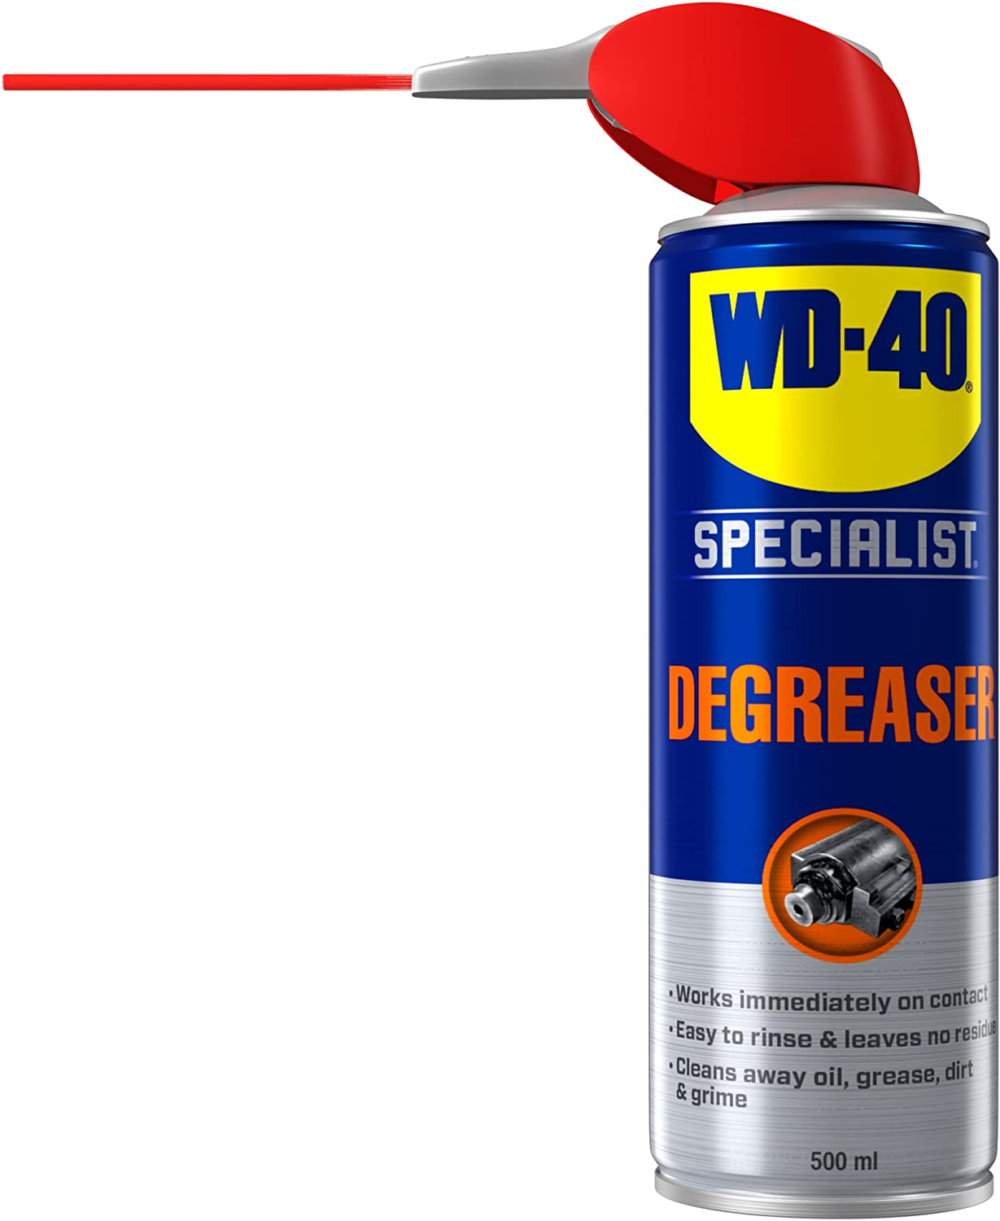 44393 degreaser specialist fast acting solvent based degreaser for engines, chains, gears removes stubborn oil, grease and dirt leaving no residue smart straw narrow, wide spray 500 ml